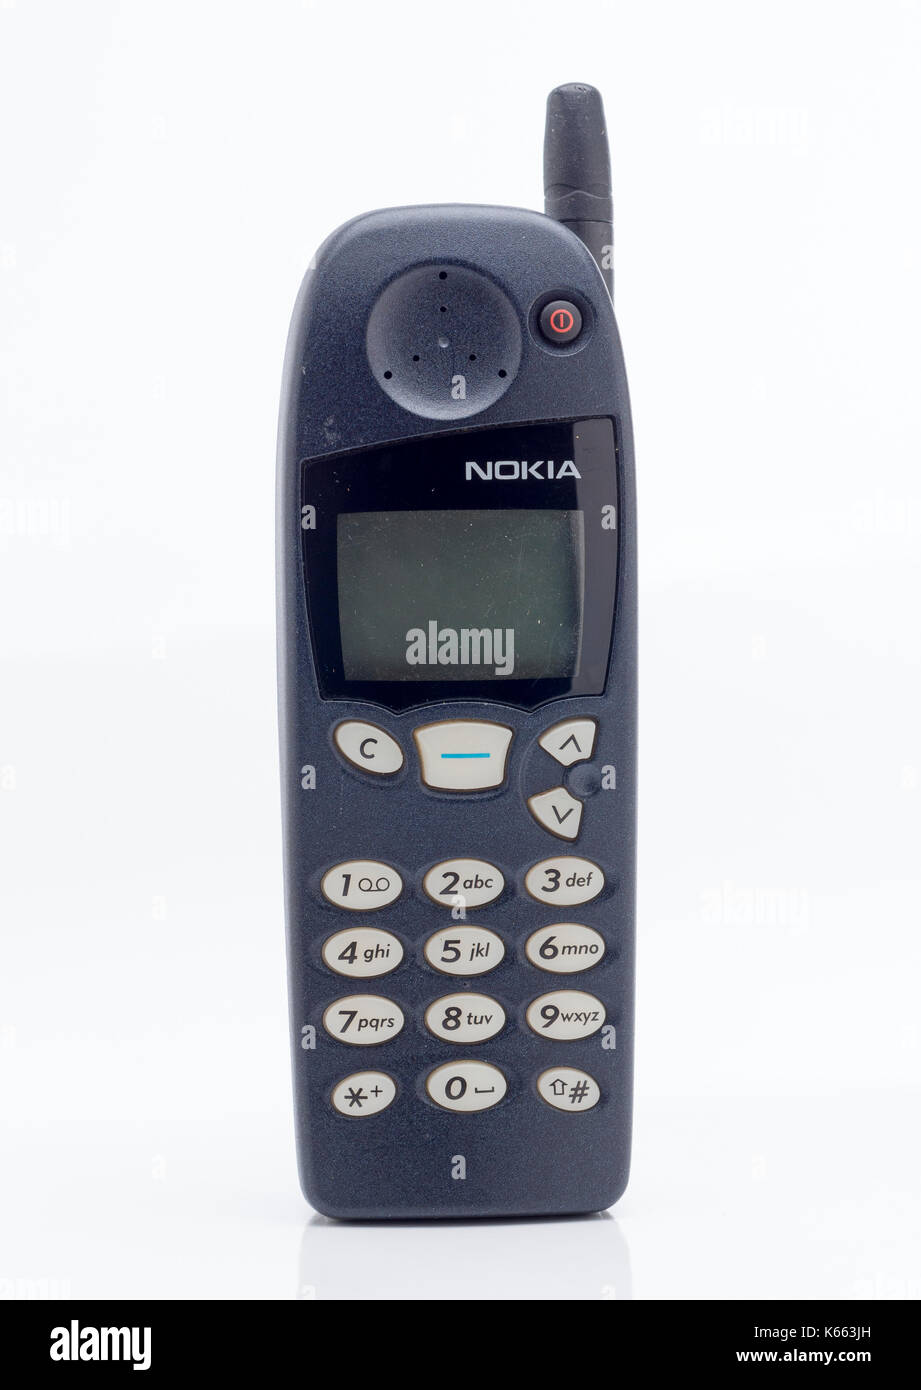 Nokia 5110 Mobile Cell Phone, First introduced in 1998. This was Nokia's 4th model. Stock Photo